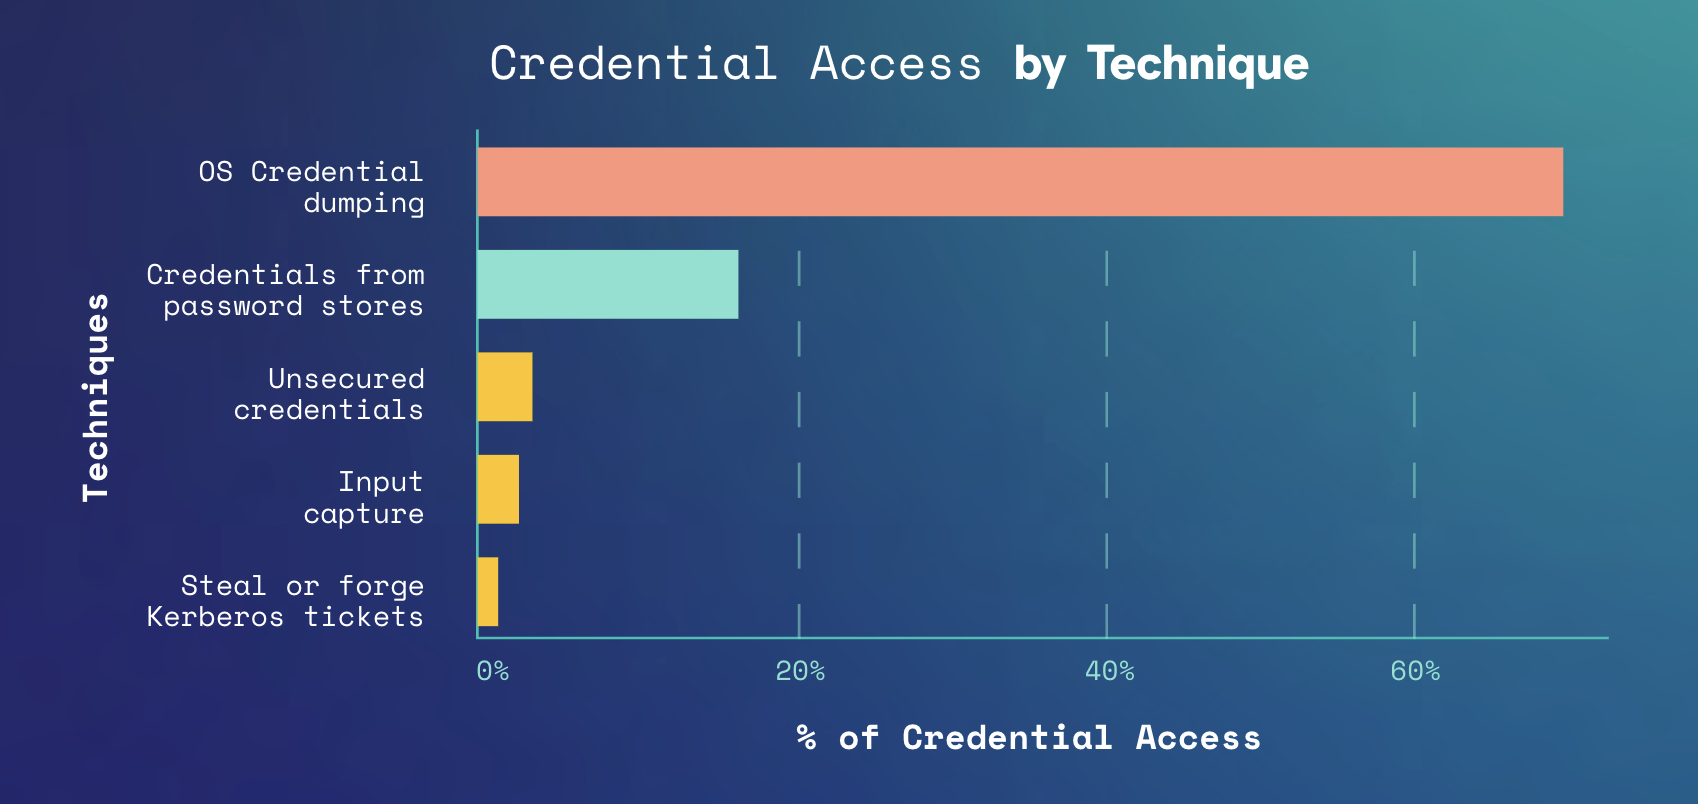 Figure 3. Commonly seen credential access techniques